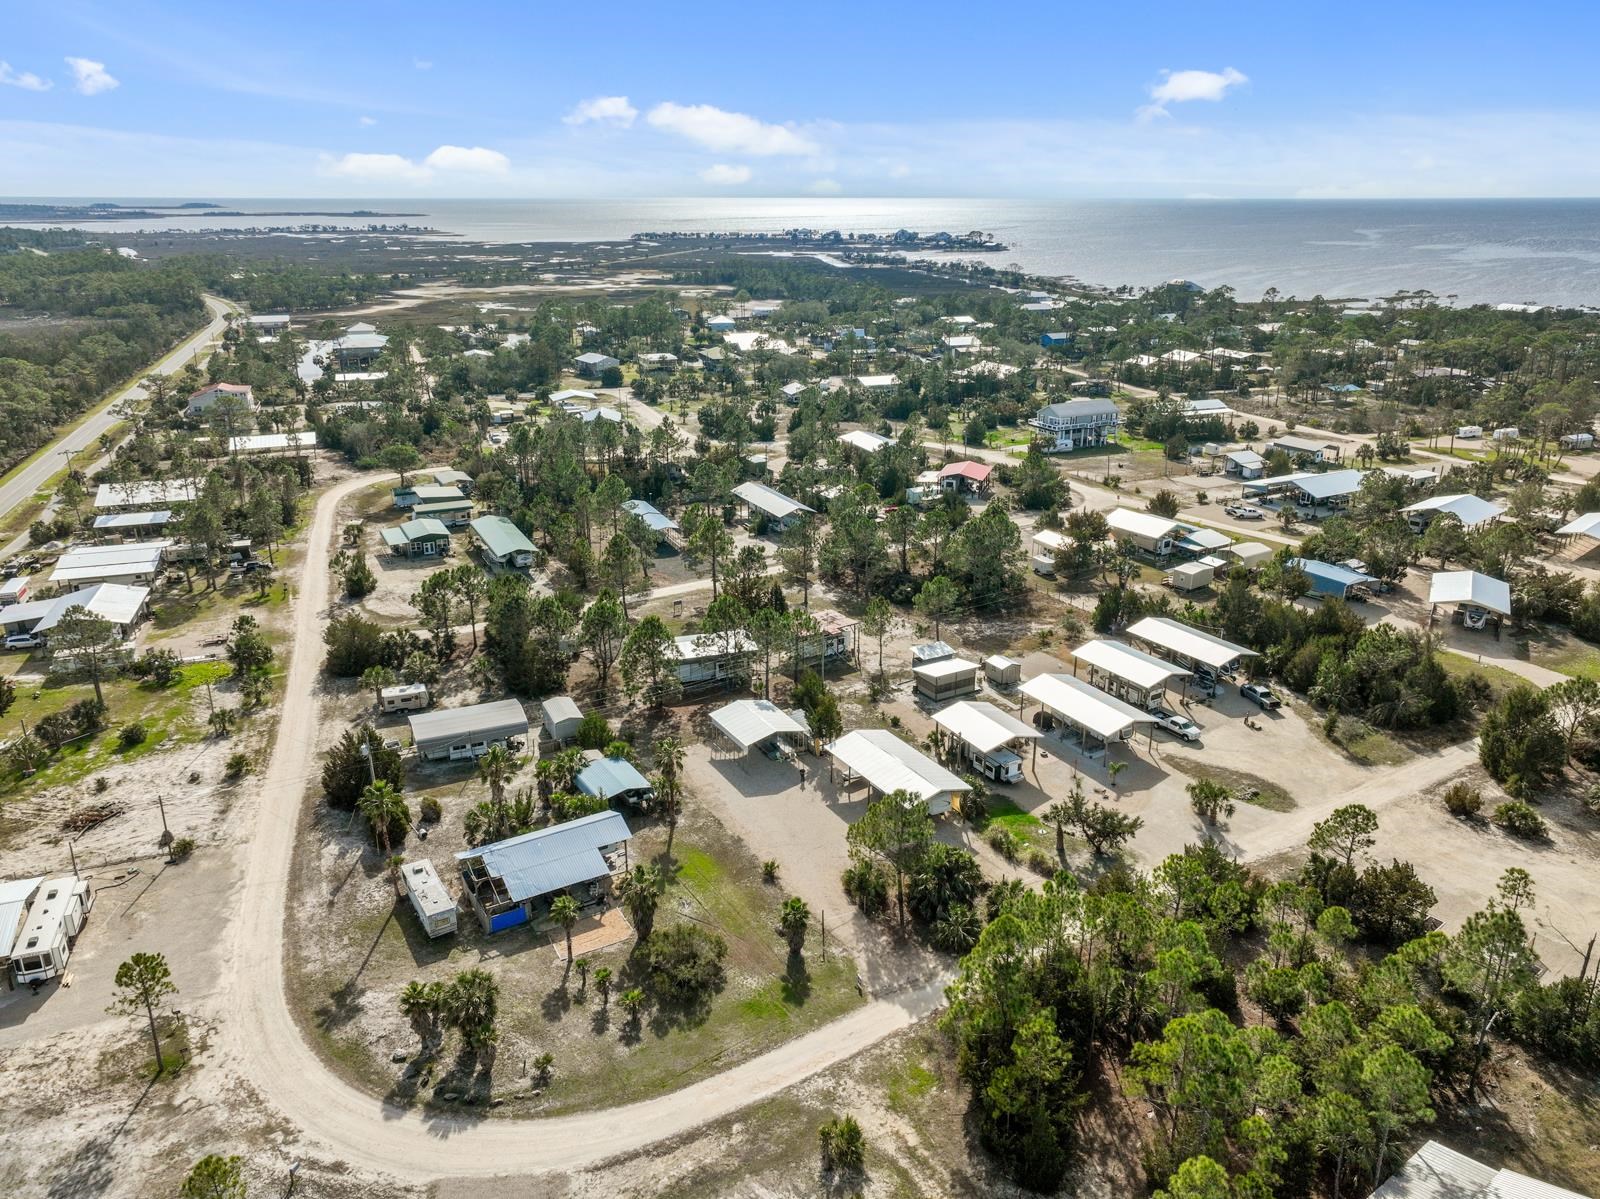 21151 Osprey,PERRY,Florida 32348-6666,Lots and land,Osprey,368139